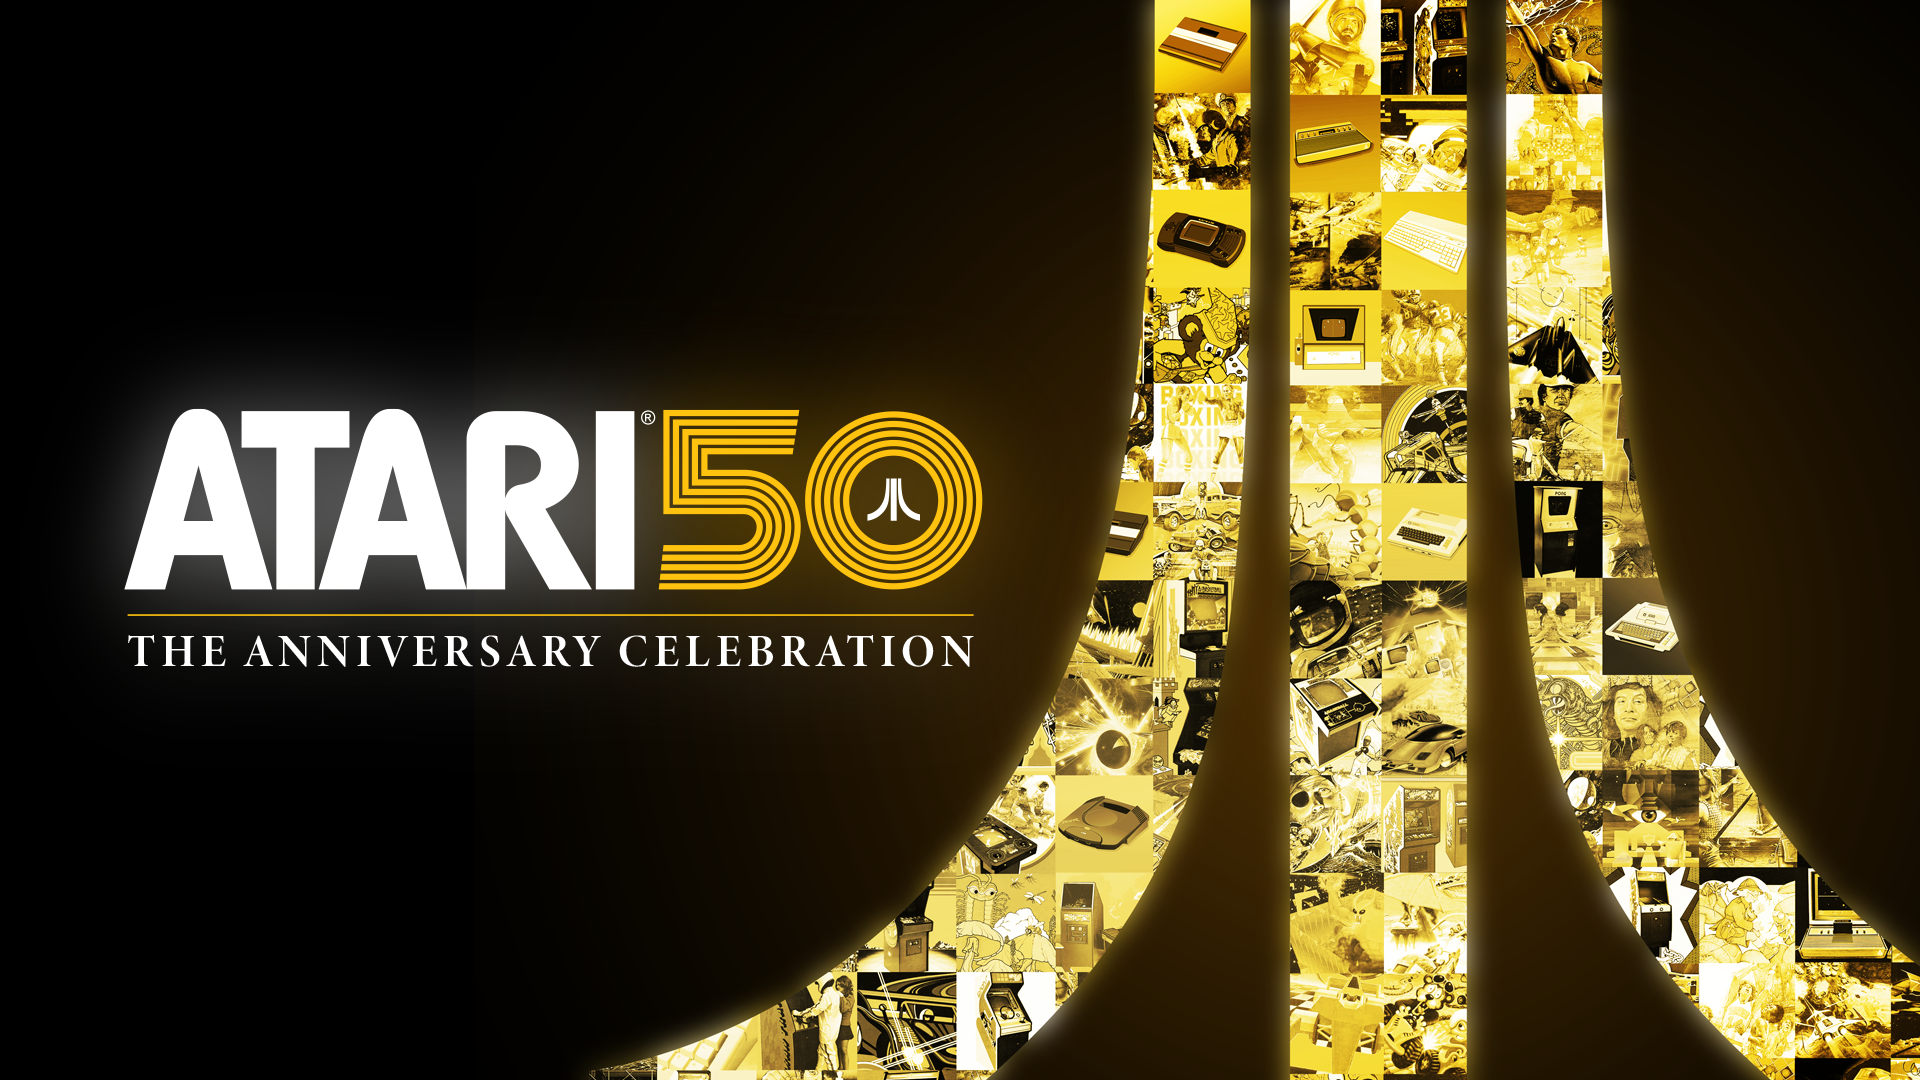 Experience gaming before you were born with Atari 50: The Anniversary Celebration 